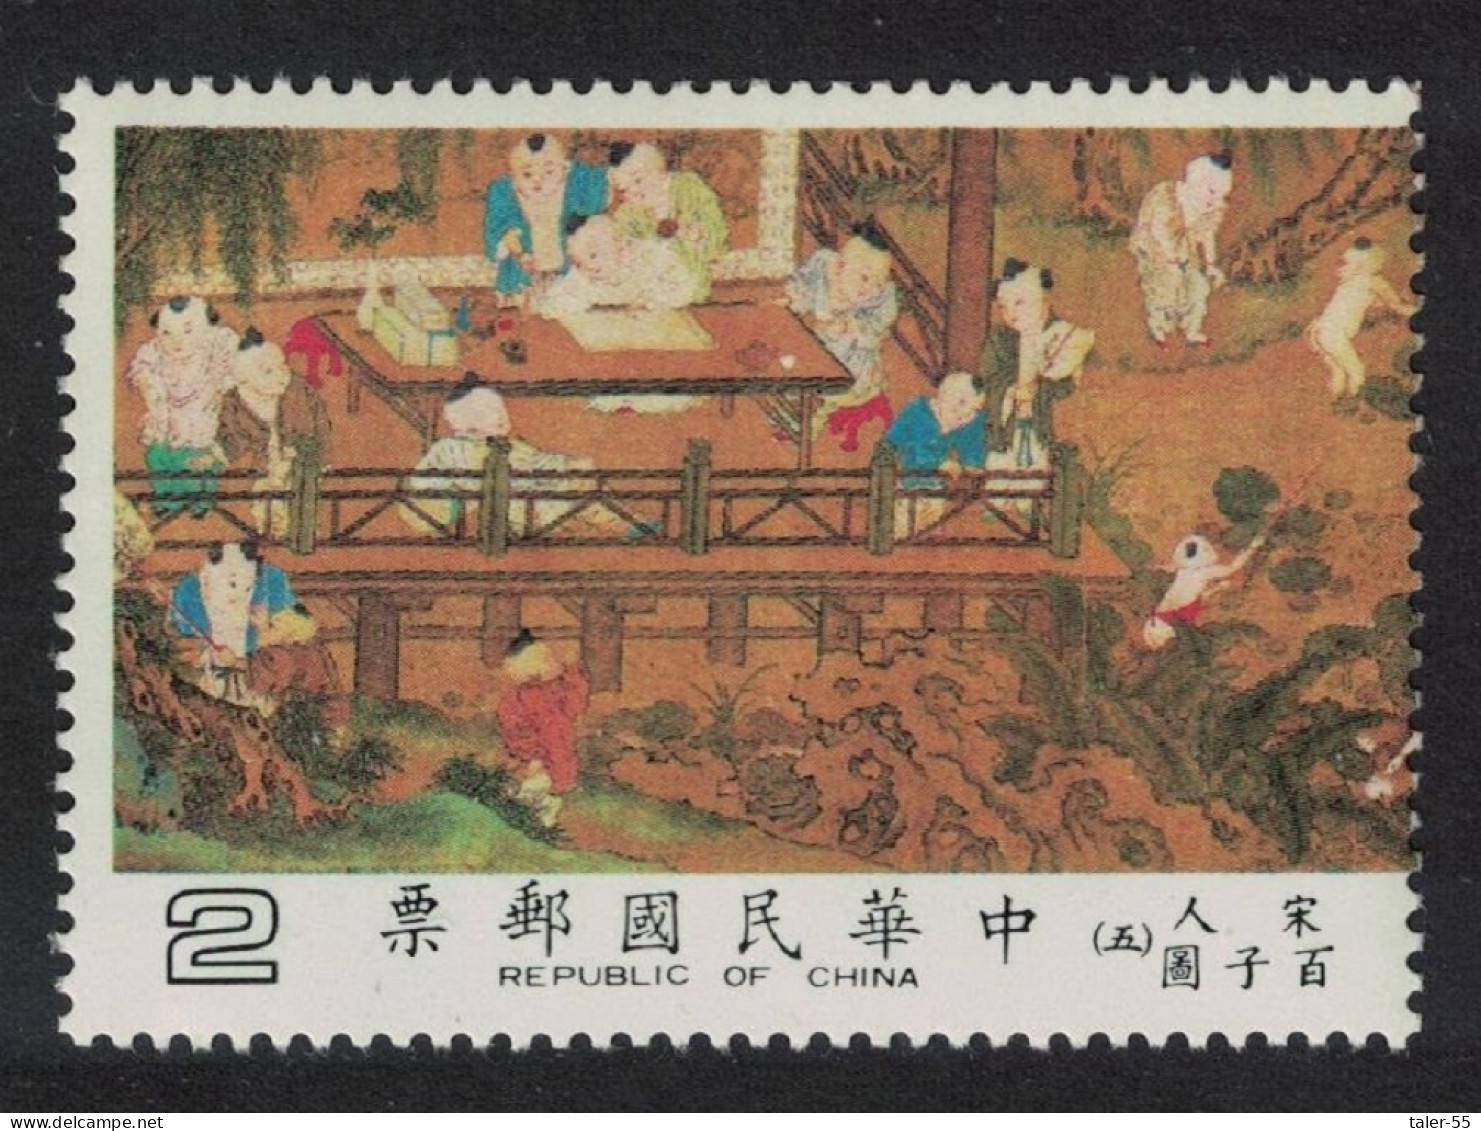 Taiwan Drawing Painting 'One Hundred Young Boys' $2 1981 MNH SG#1403 MI#1436 - Unused Stamps